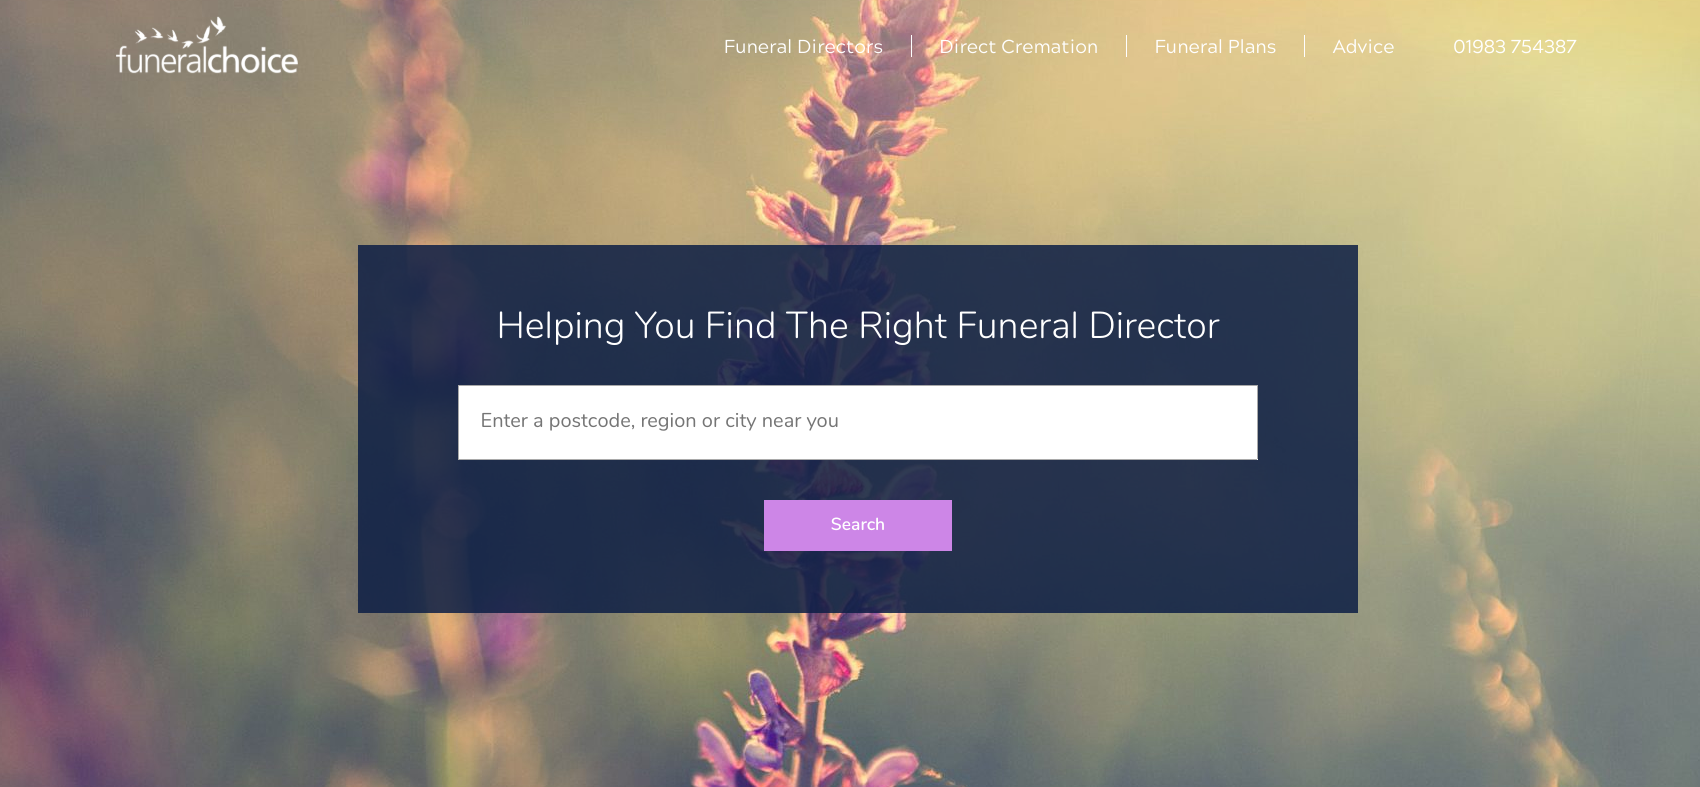 Death Care Industry_ Funeral Choice Home page _ price comparison site